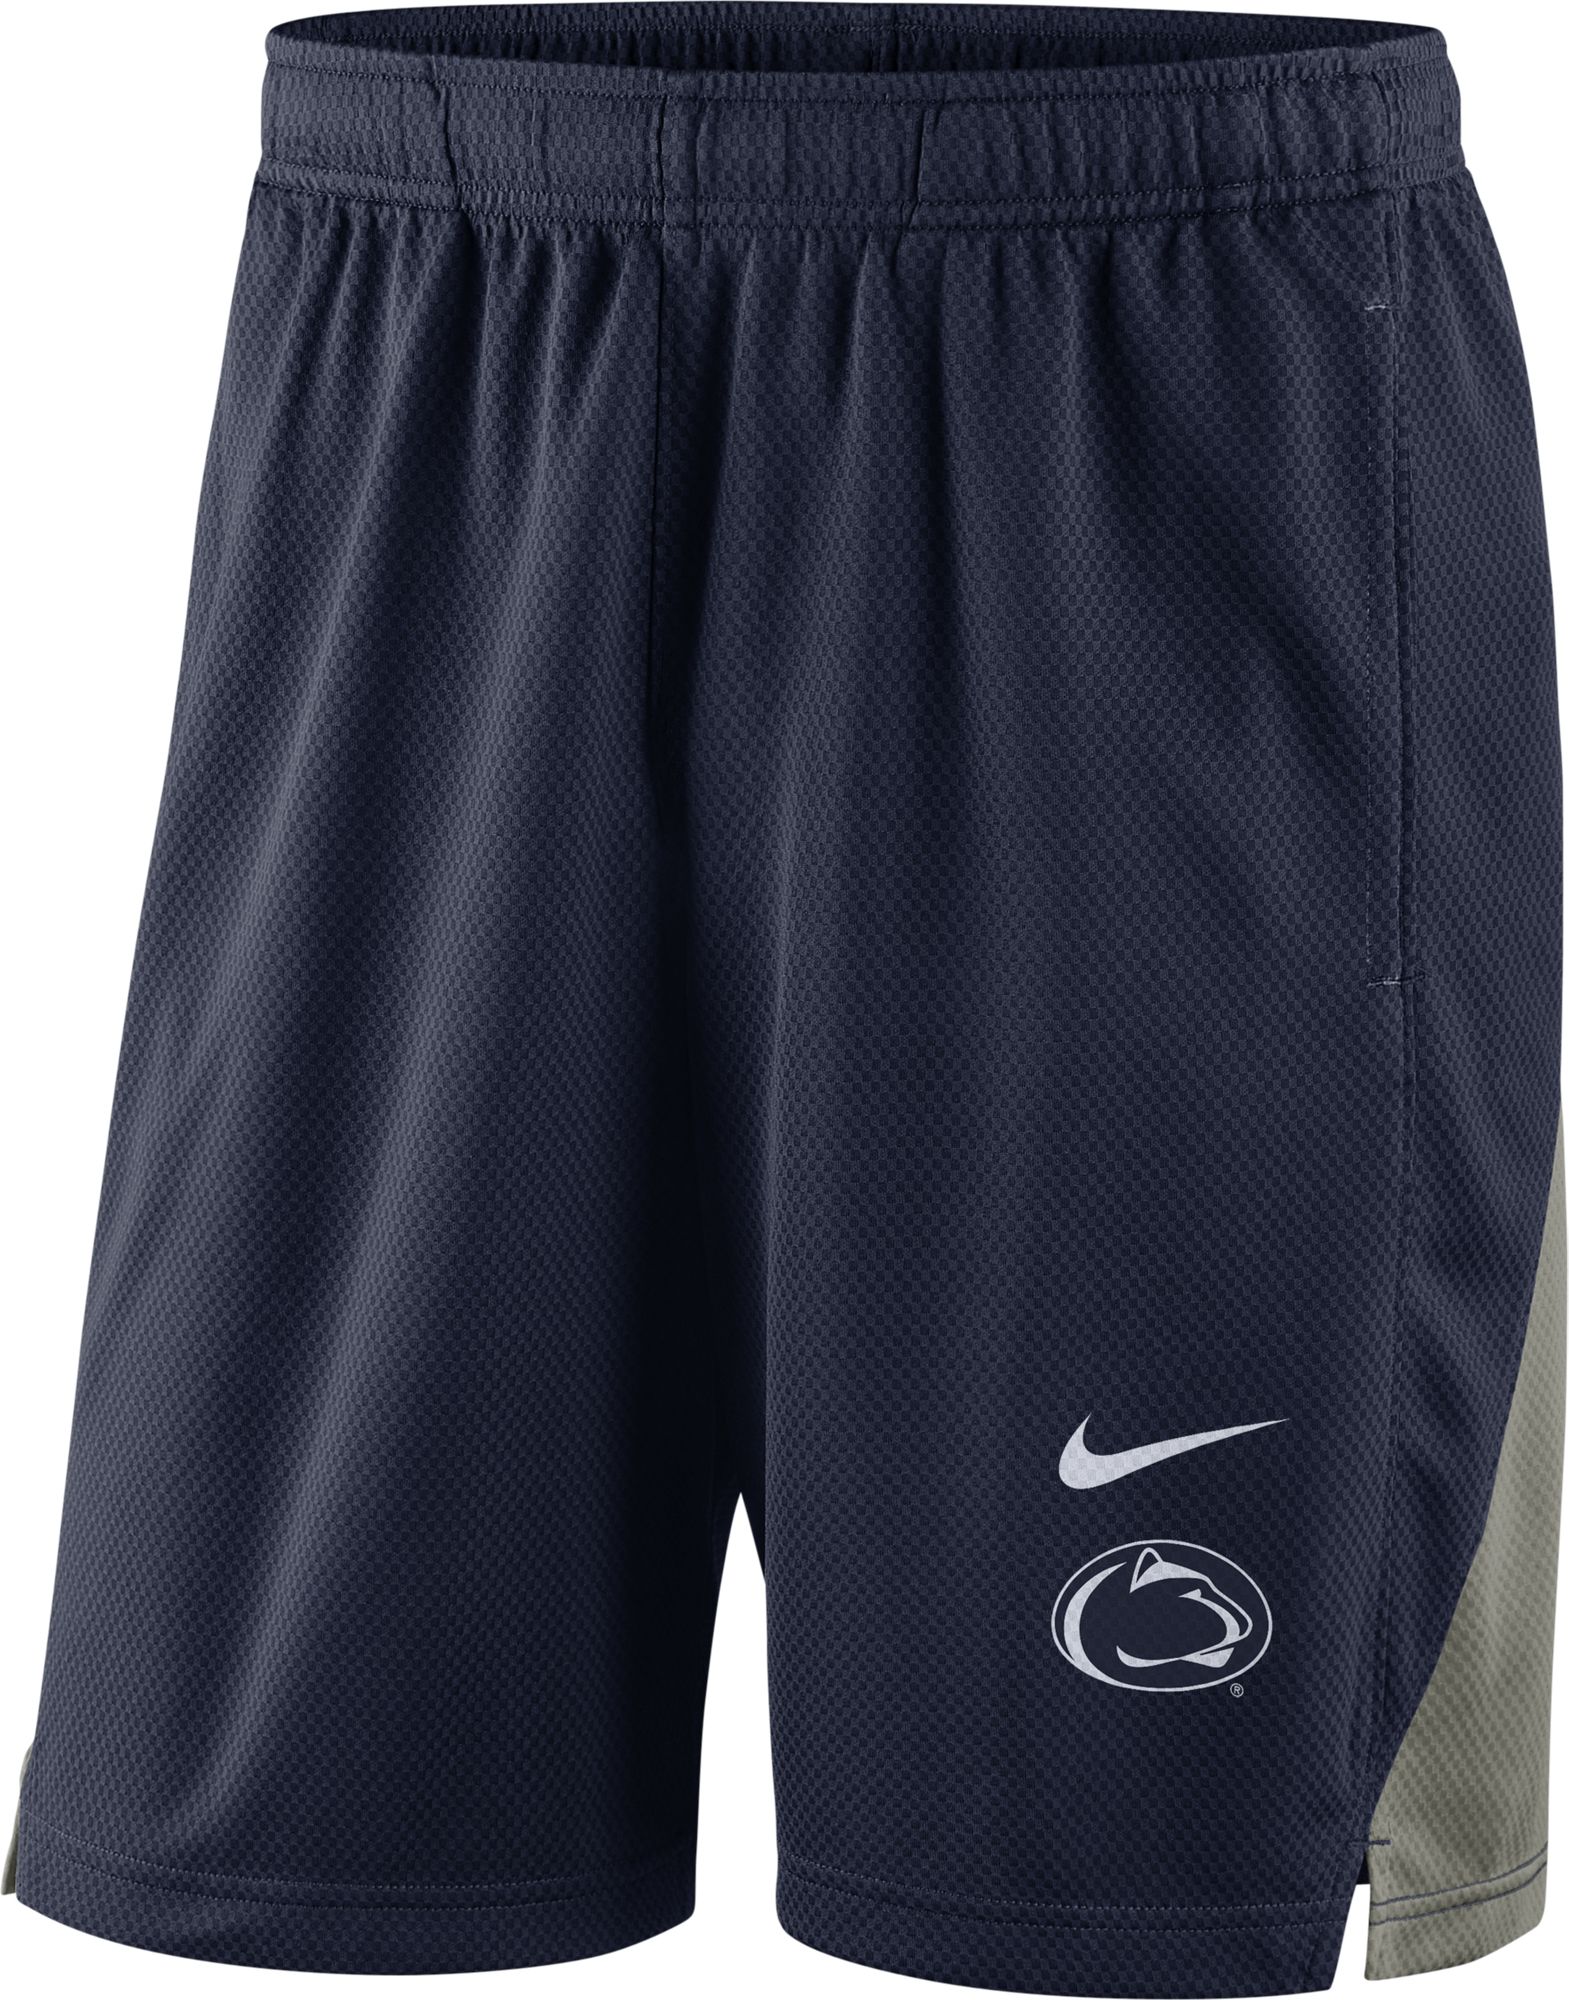 Penn State Nittany Lions Blue 